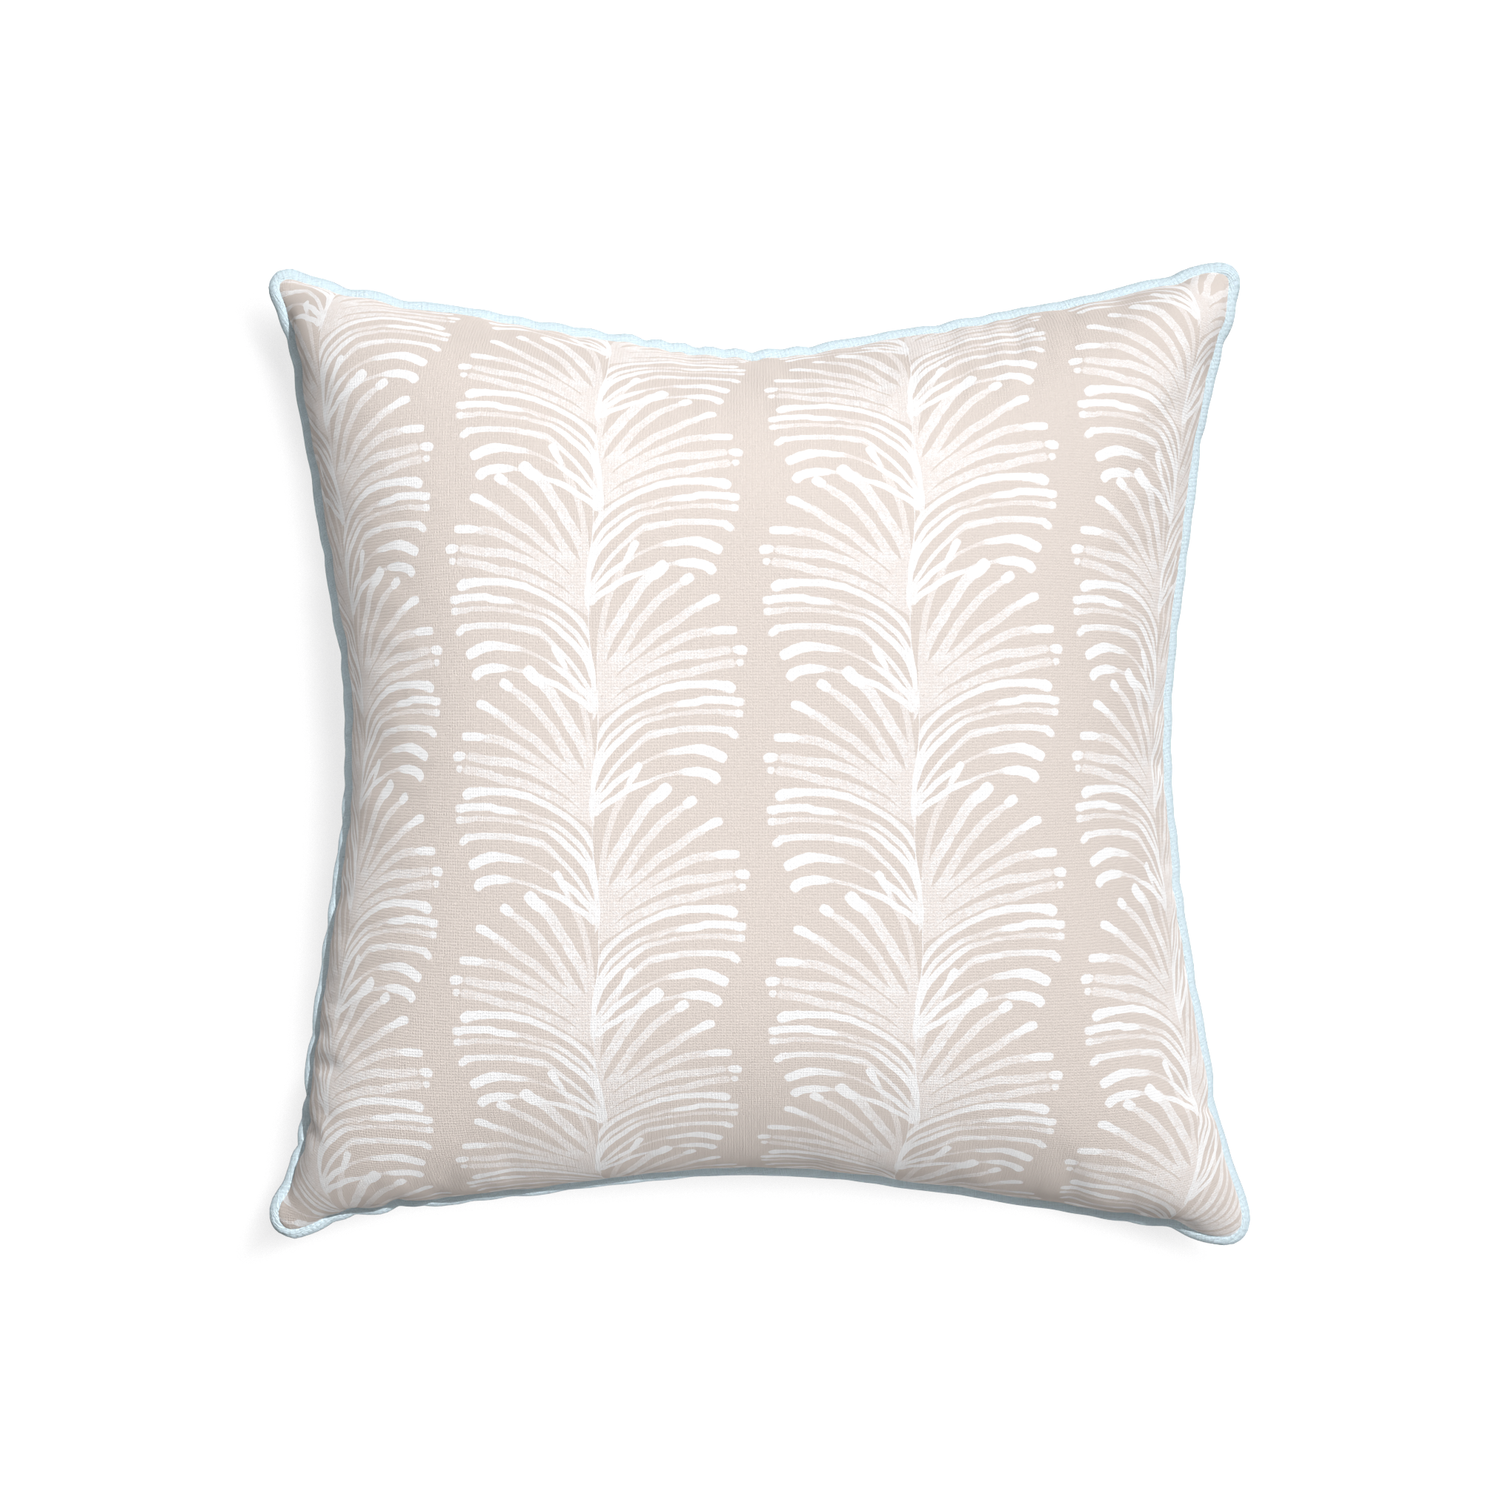 22-square emma sand custom pillow with powder piping on white background